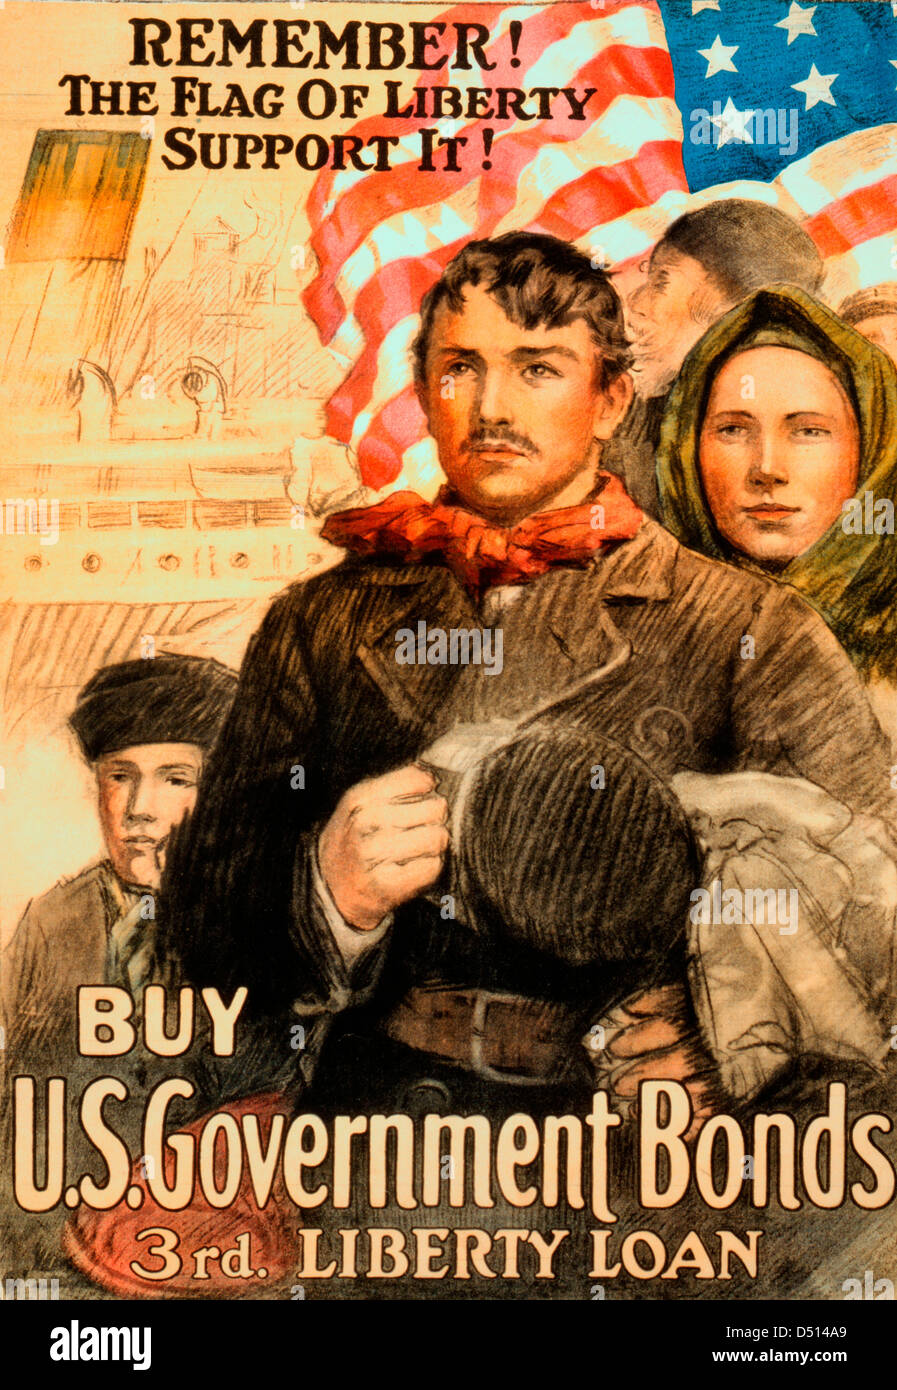 Remember! The flag of liberty--Support it! Buy U.S. government bonds, 3rd Liberty Loan / Poster showing immigrants before an American flag. Stock Photo